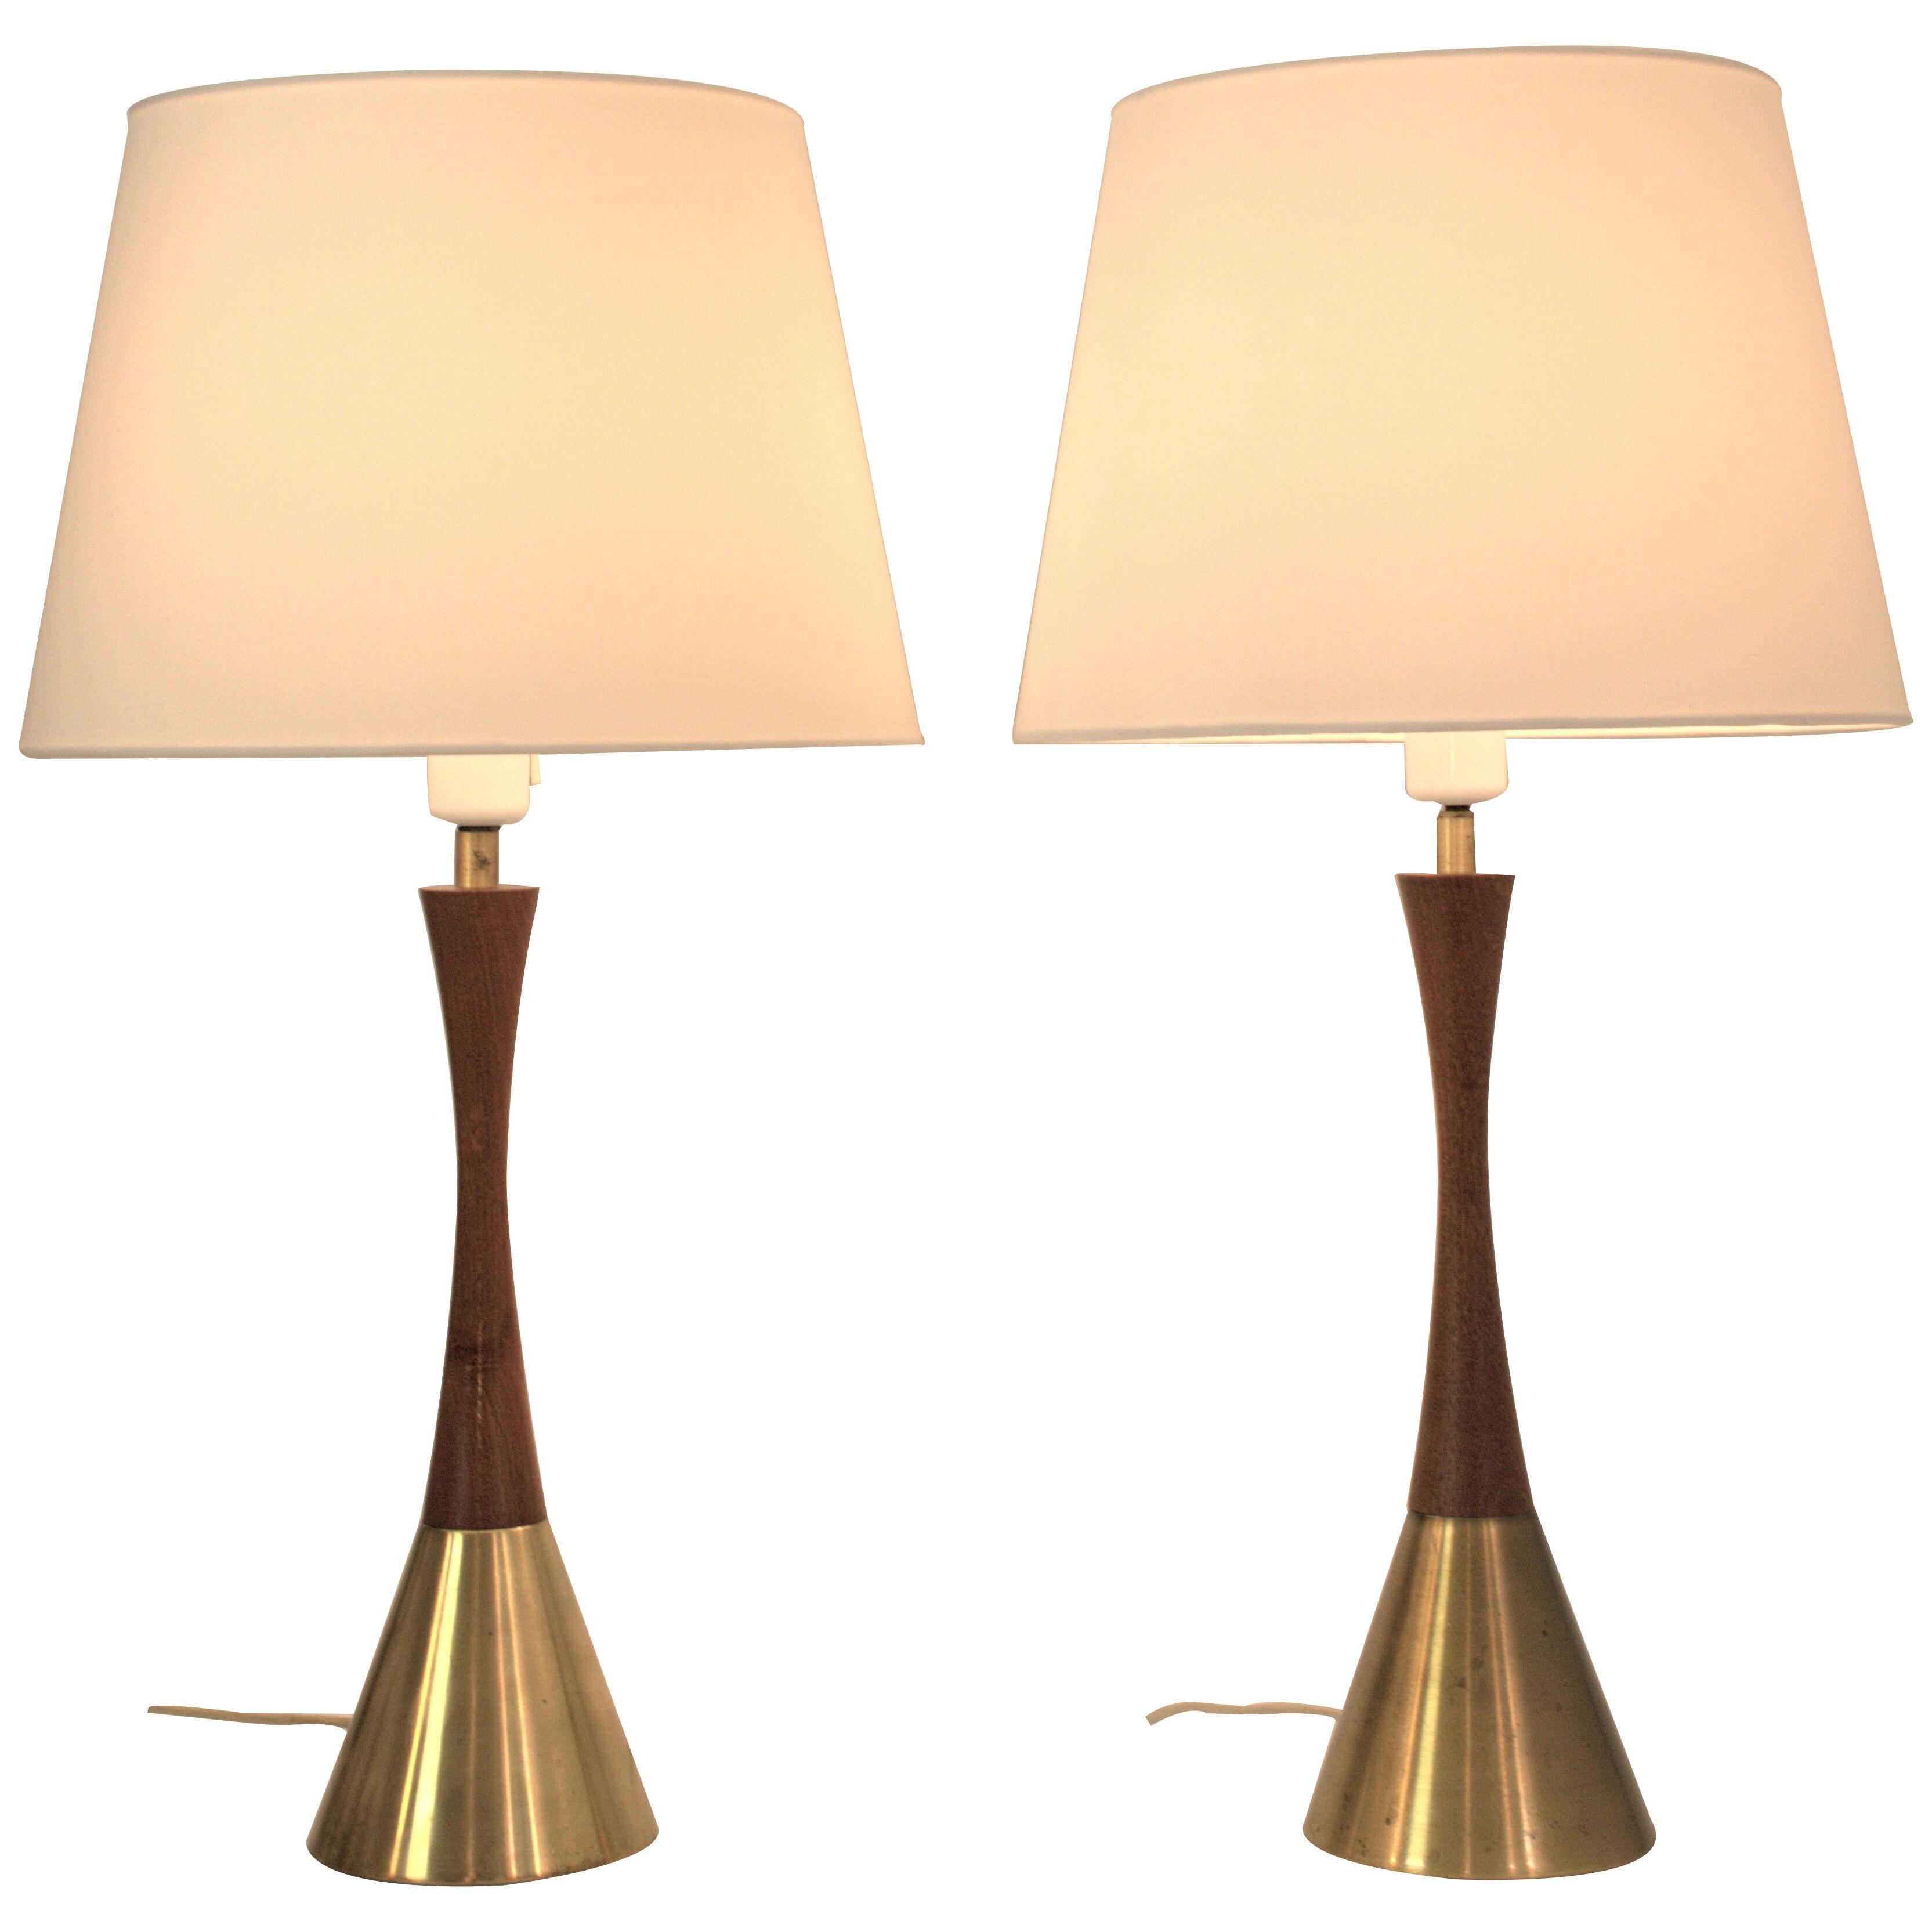 Pair Swedish Modern Teak and Brass Table Lamps, Made in Denmark for Bergboms